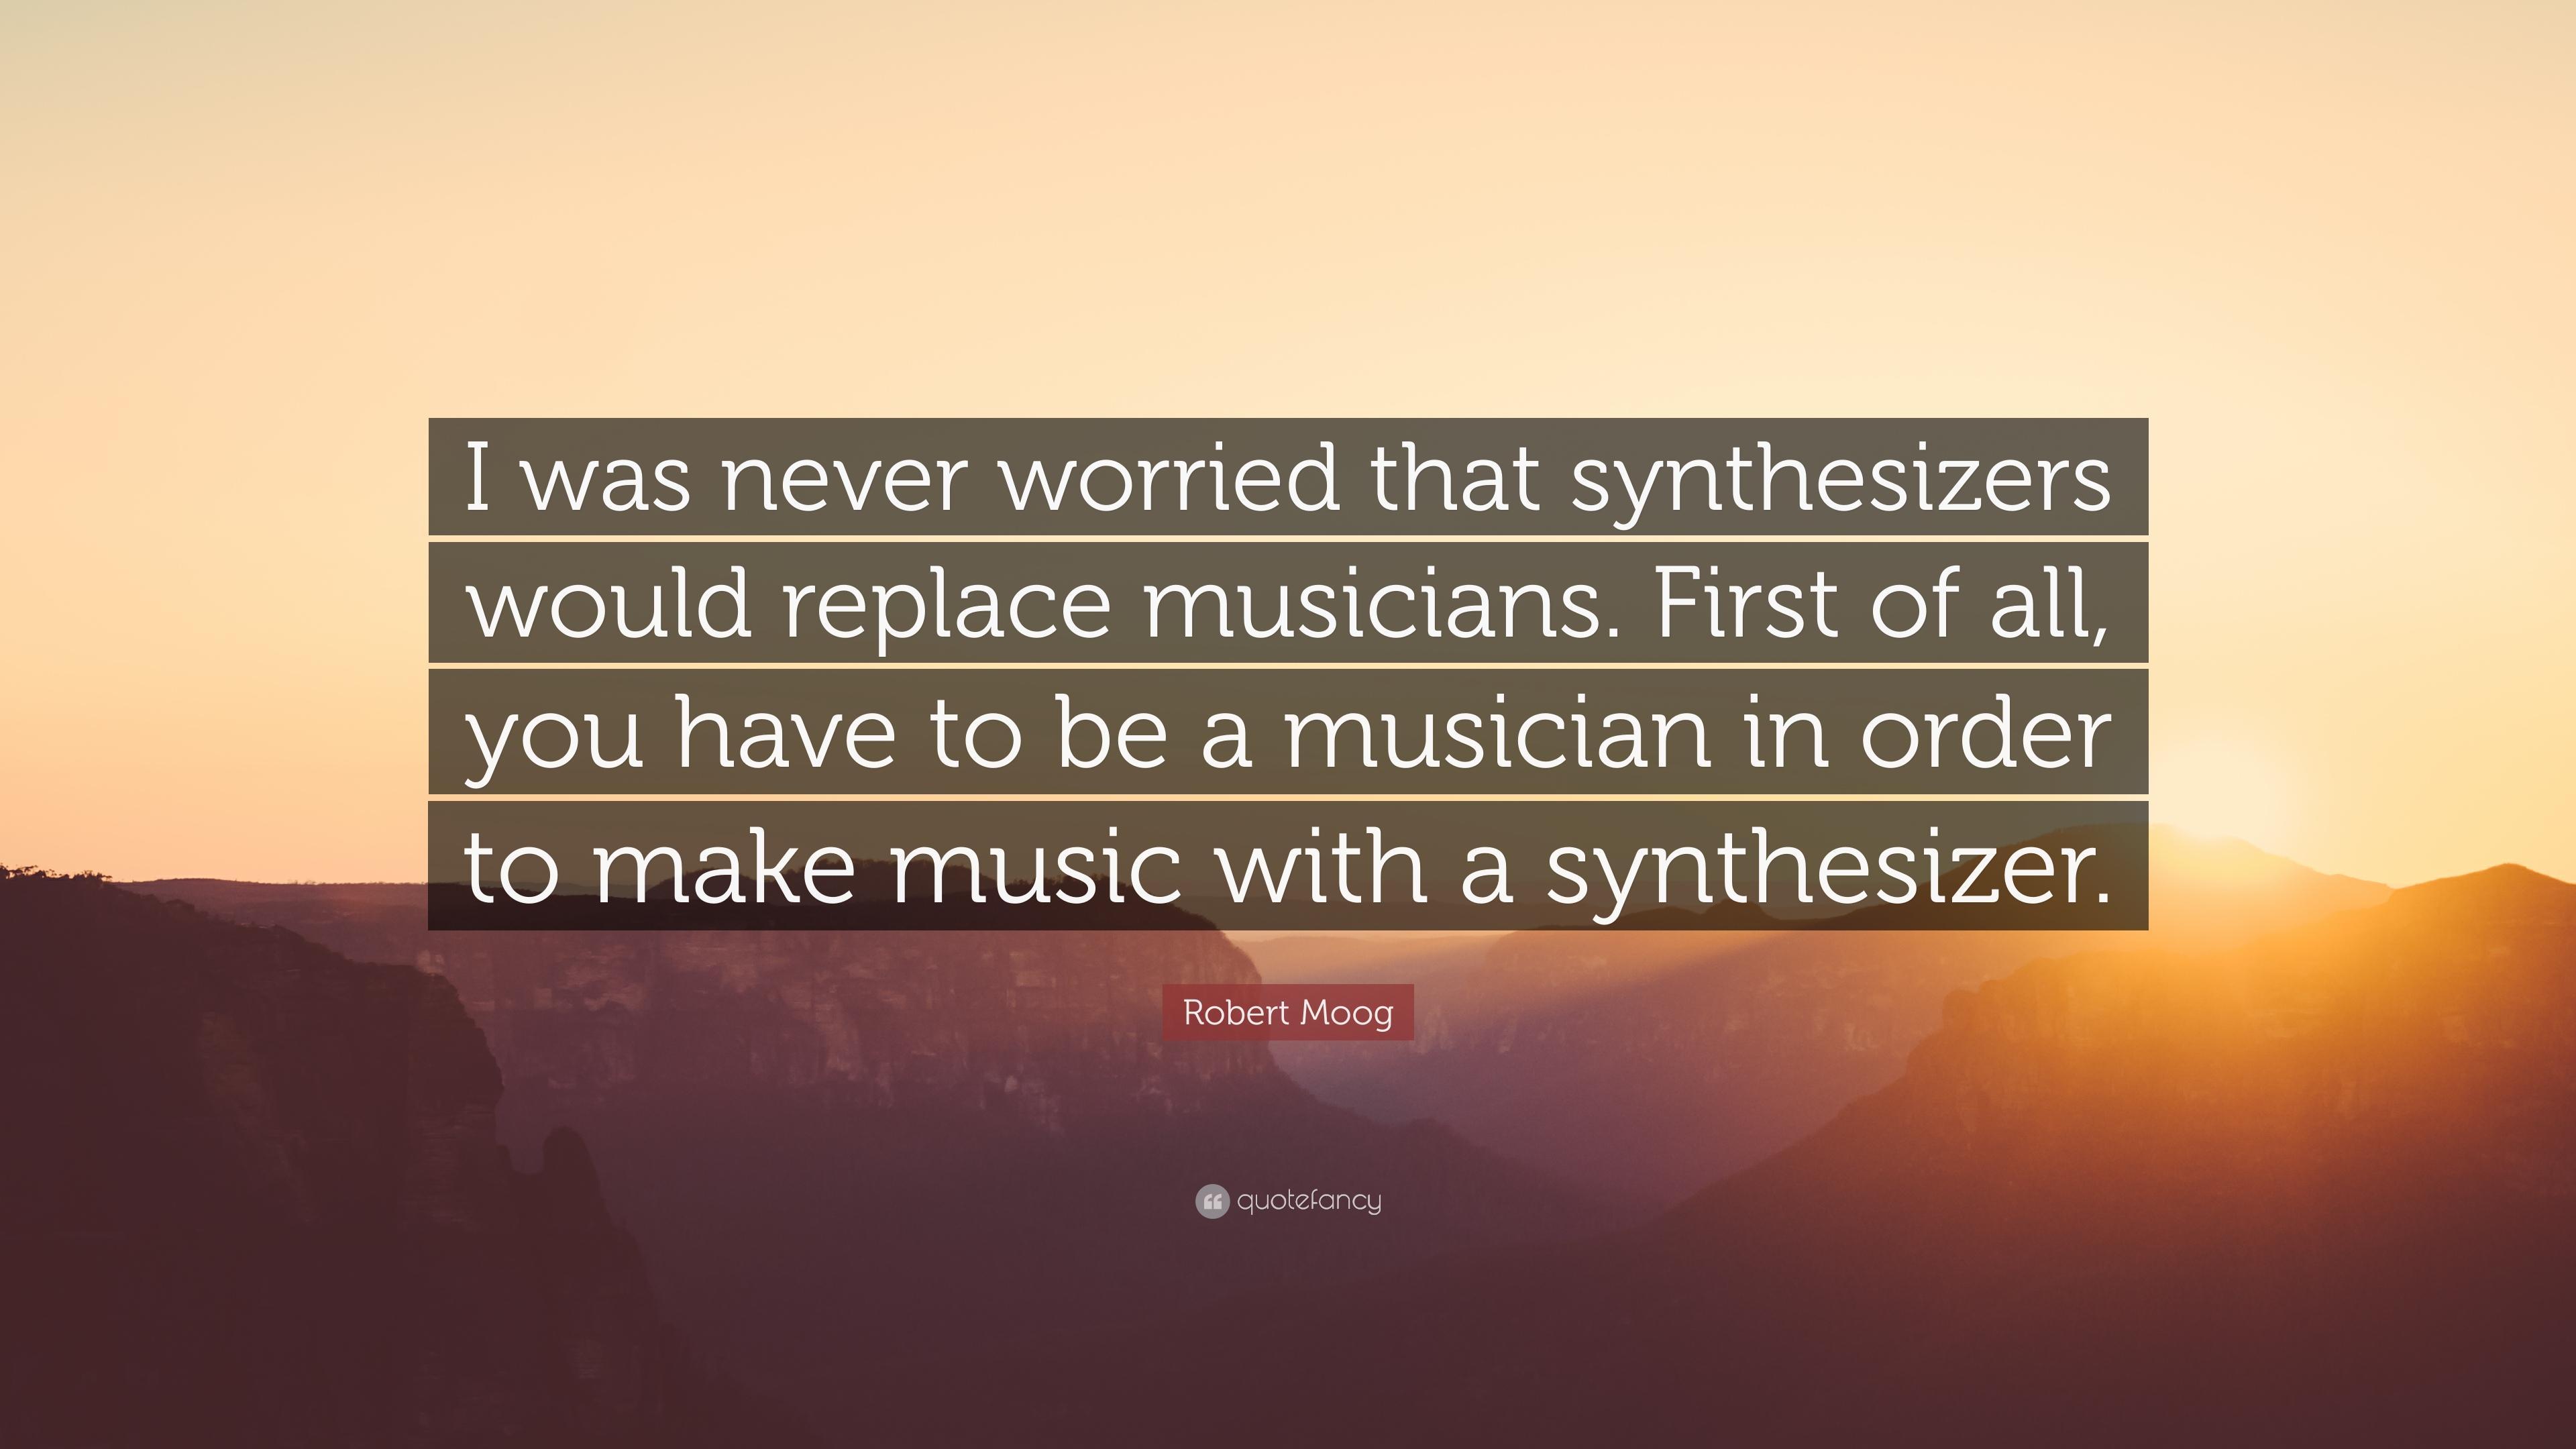 Robert Moog Quote: “I was never worried that synthesizers